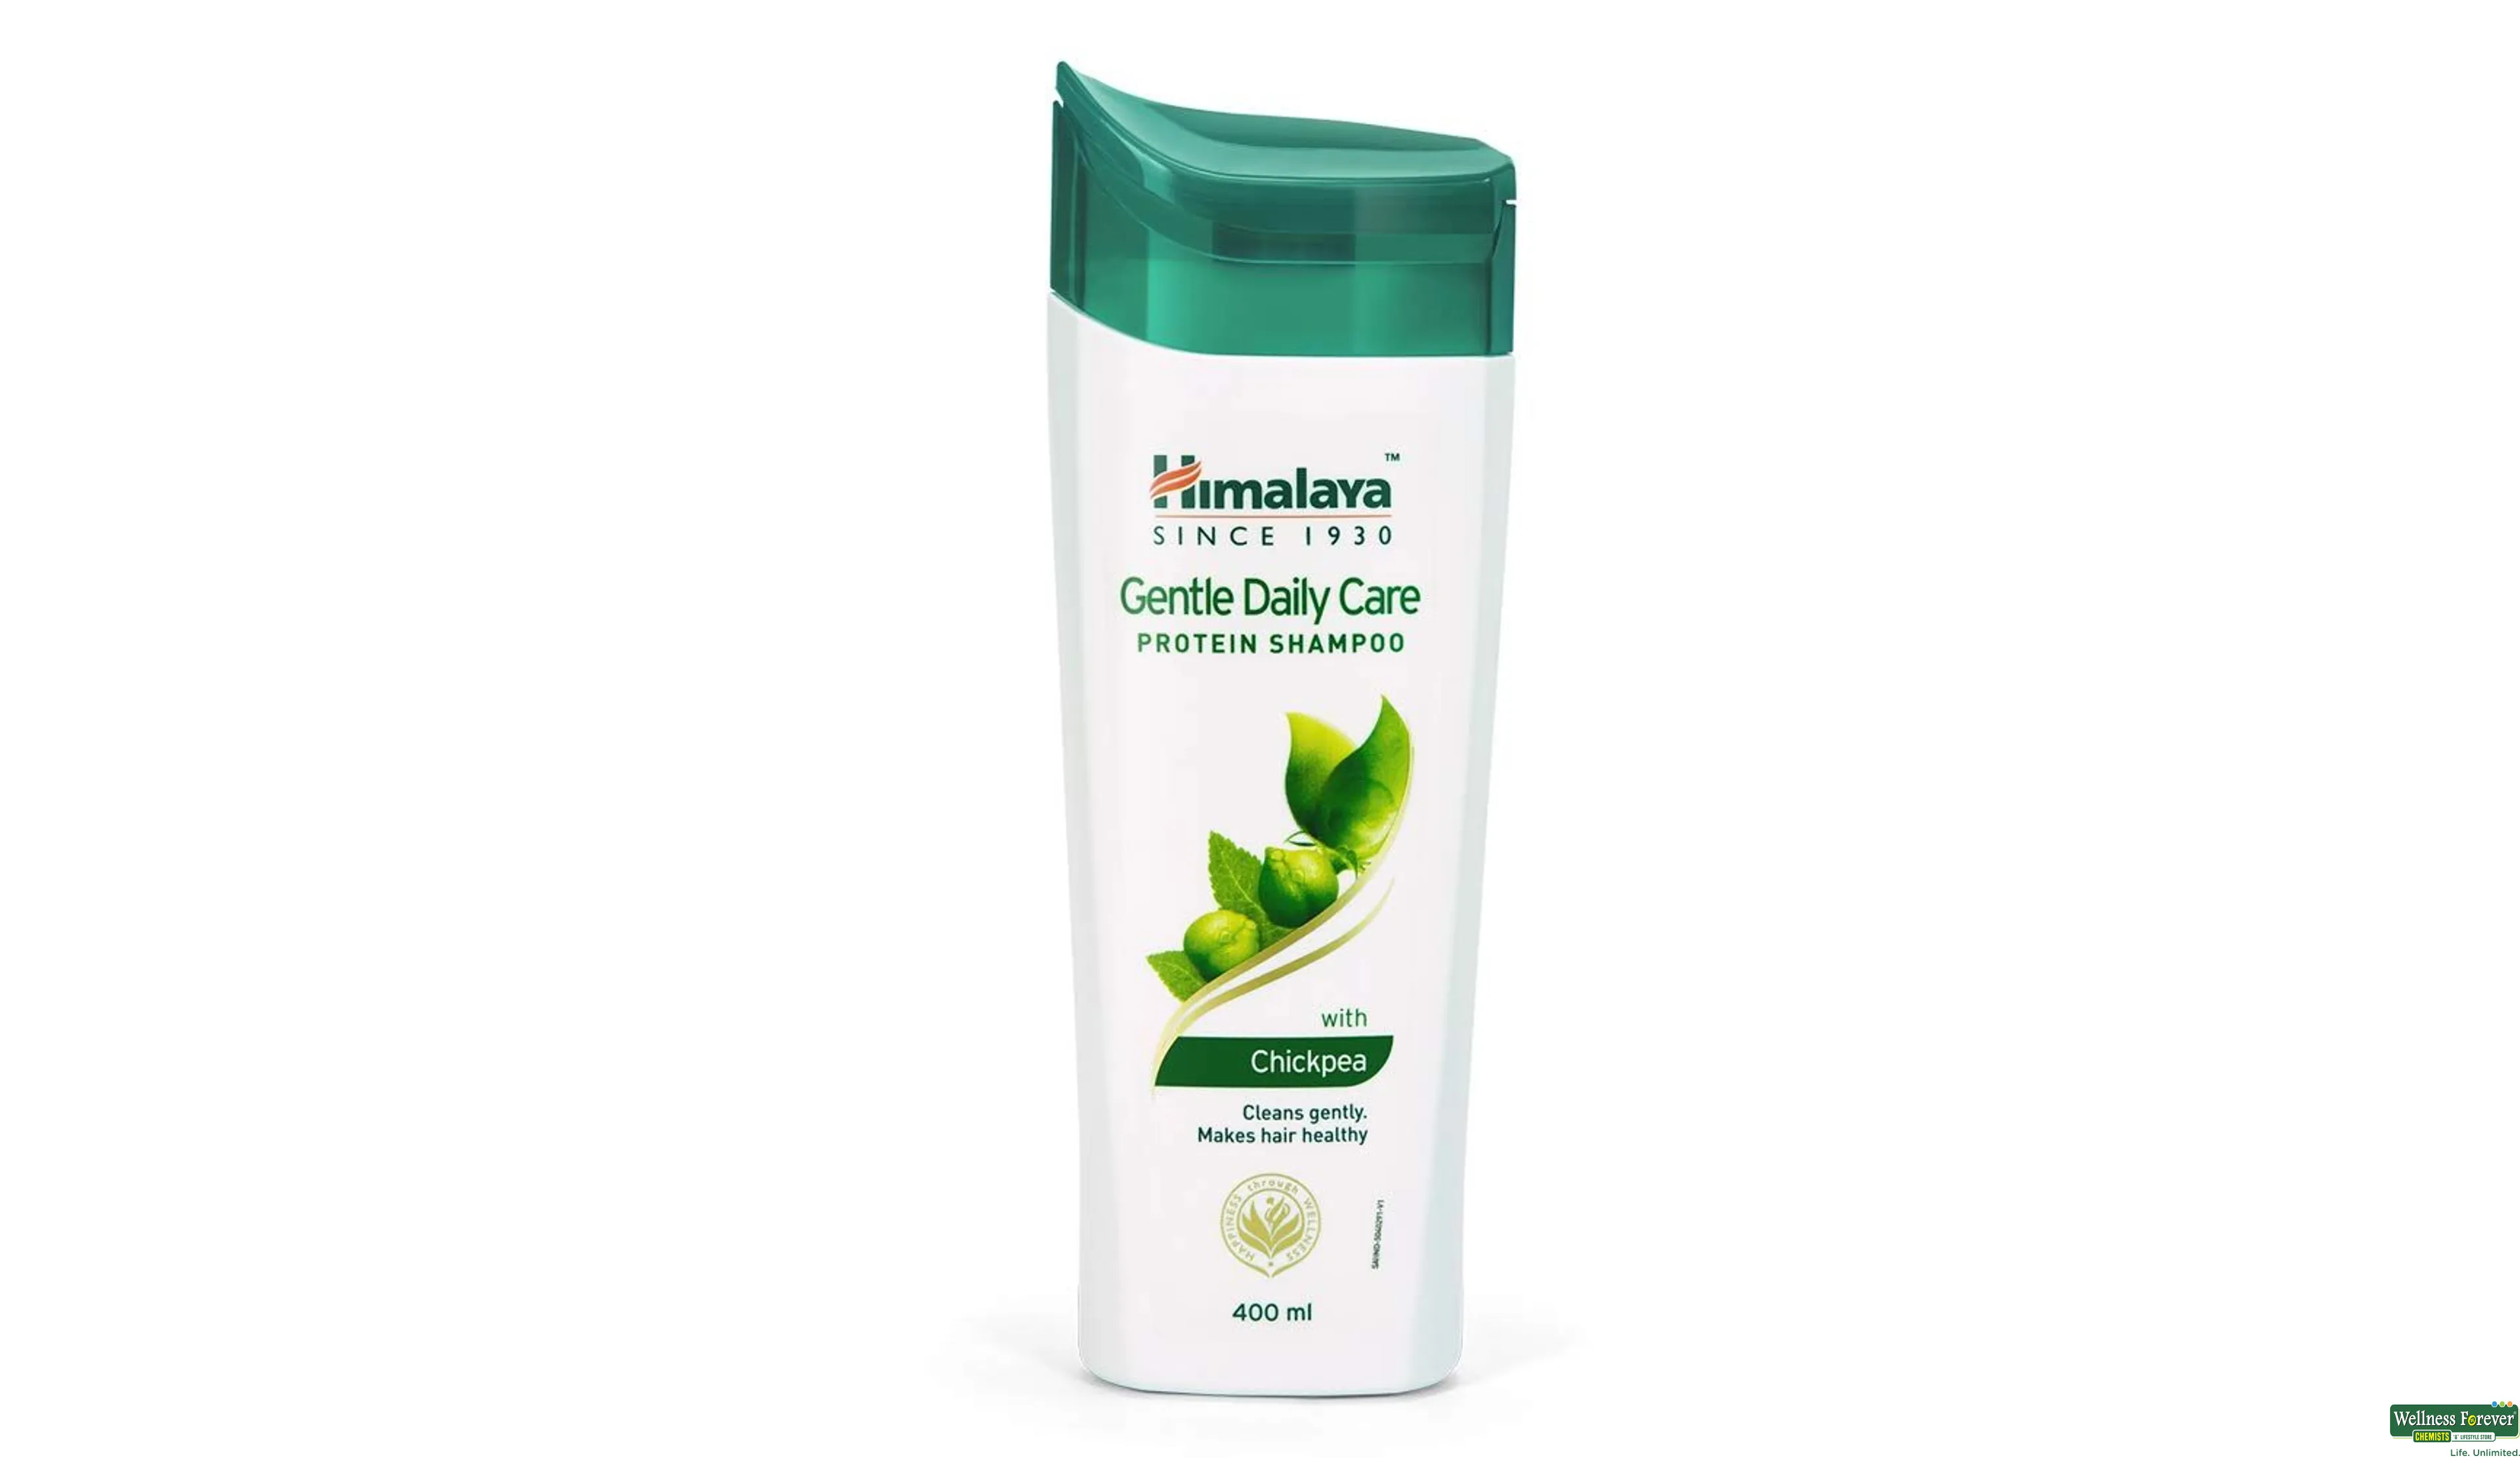 GENTLE DAILY CARE NATURAL PROTEIN SHAMPOO 340ML- 1, 340ML, 